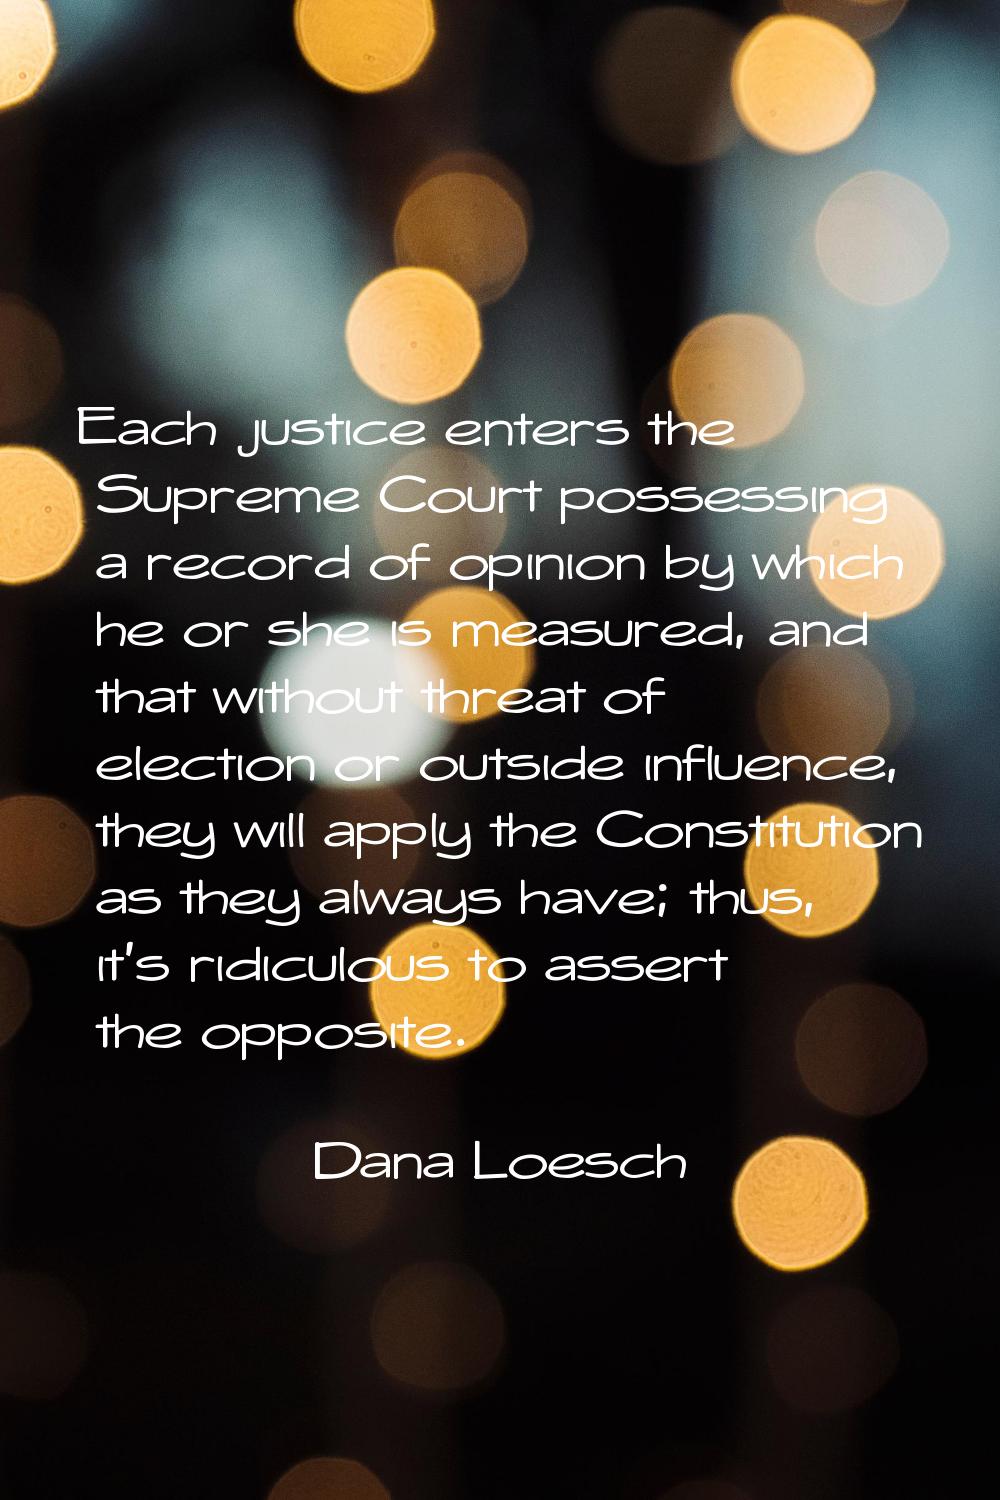 Each justice enters the Supreme Court possessing a record of opinion by which he or she is measured